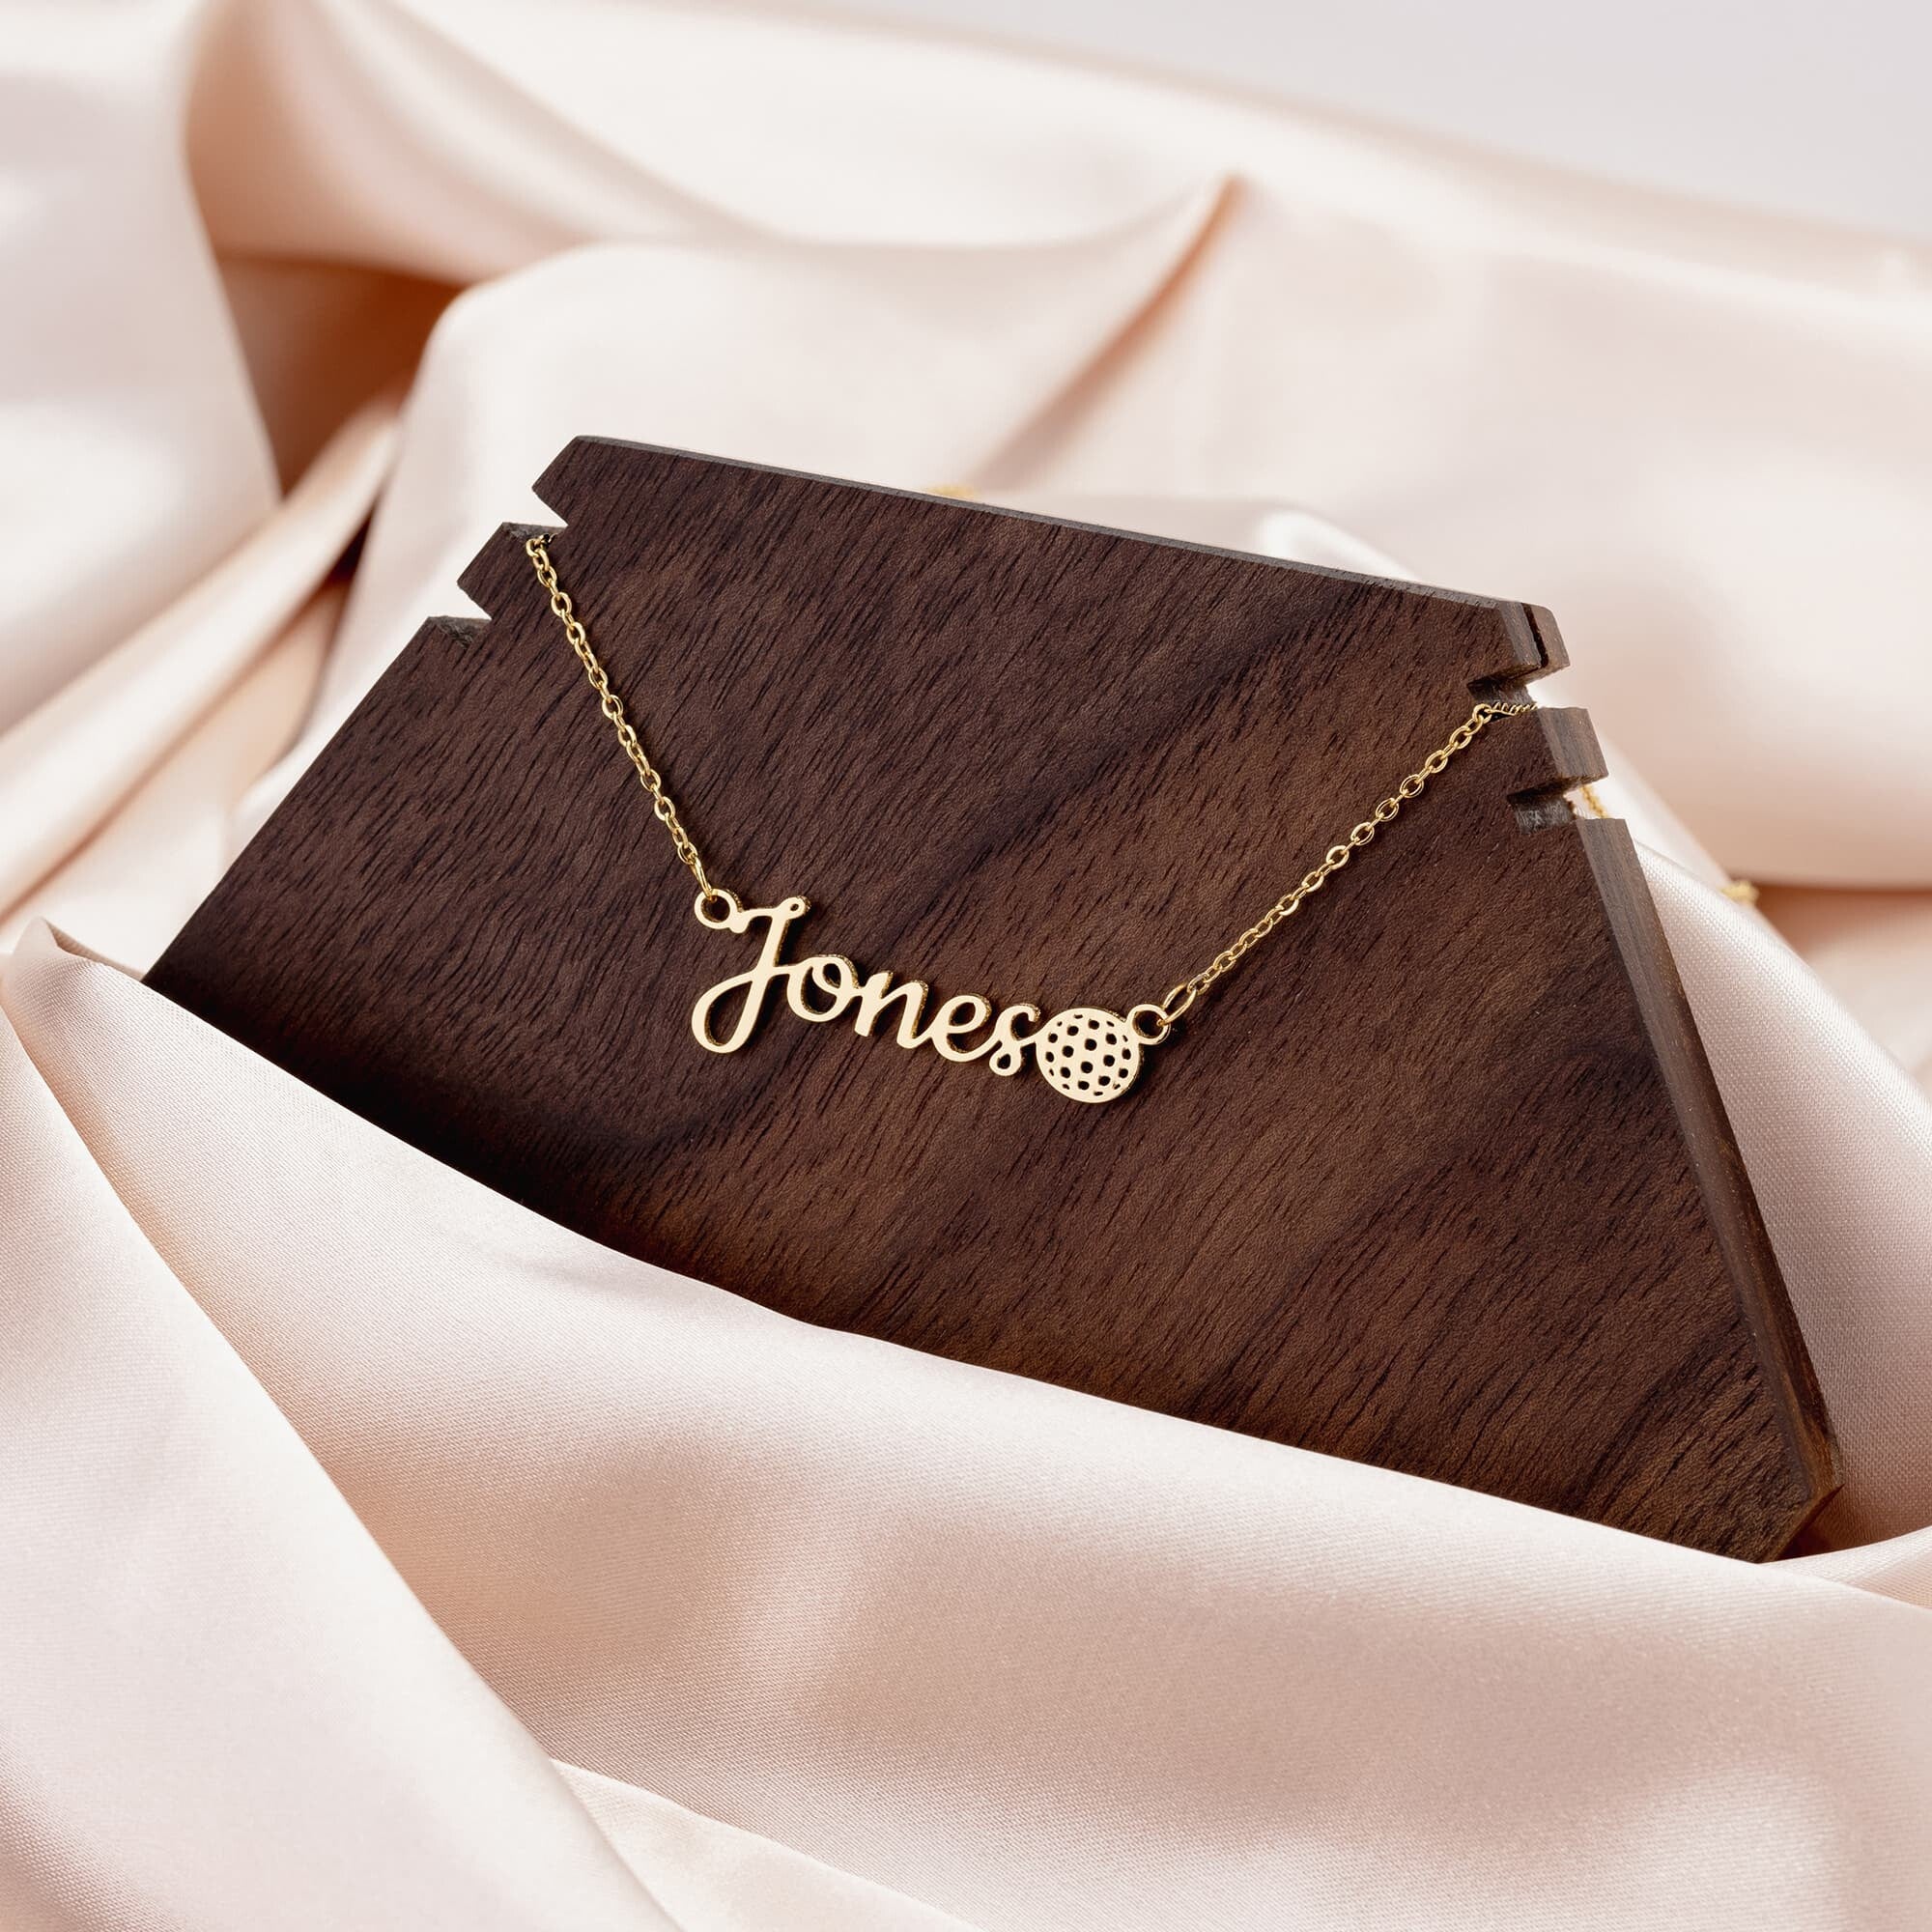 Personalized jewelry for her